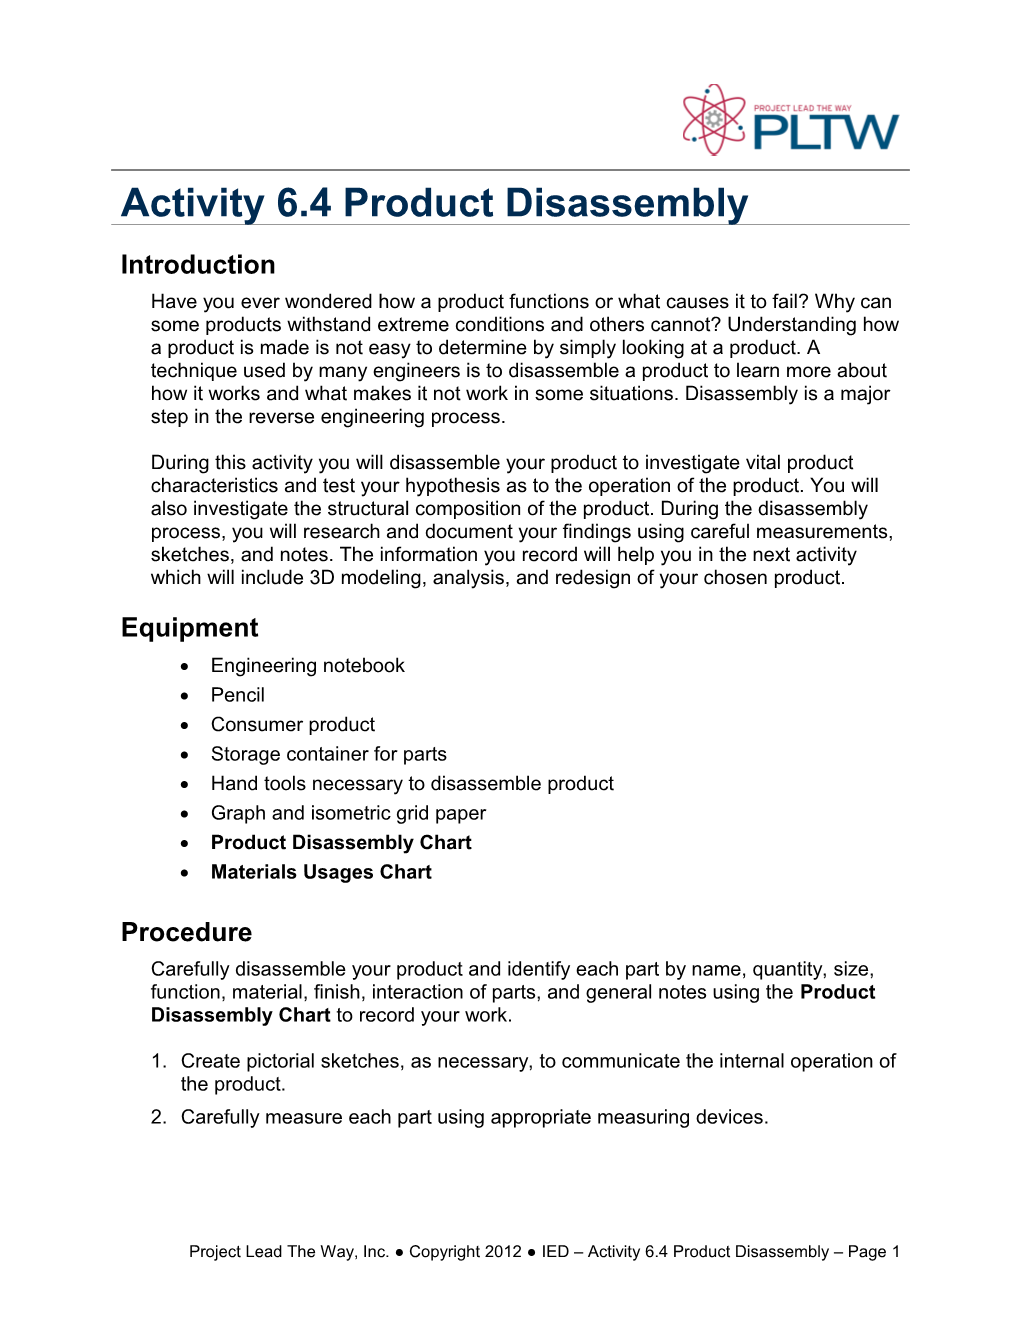 Activity 6.4 Product Disassembly